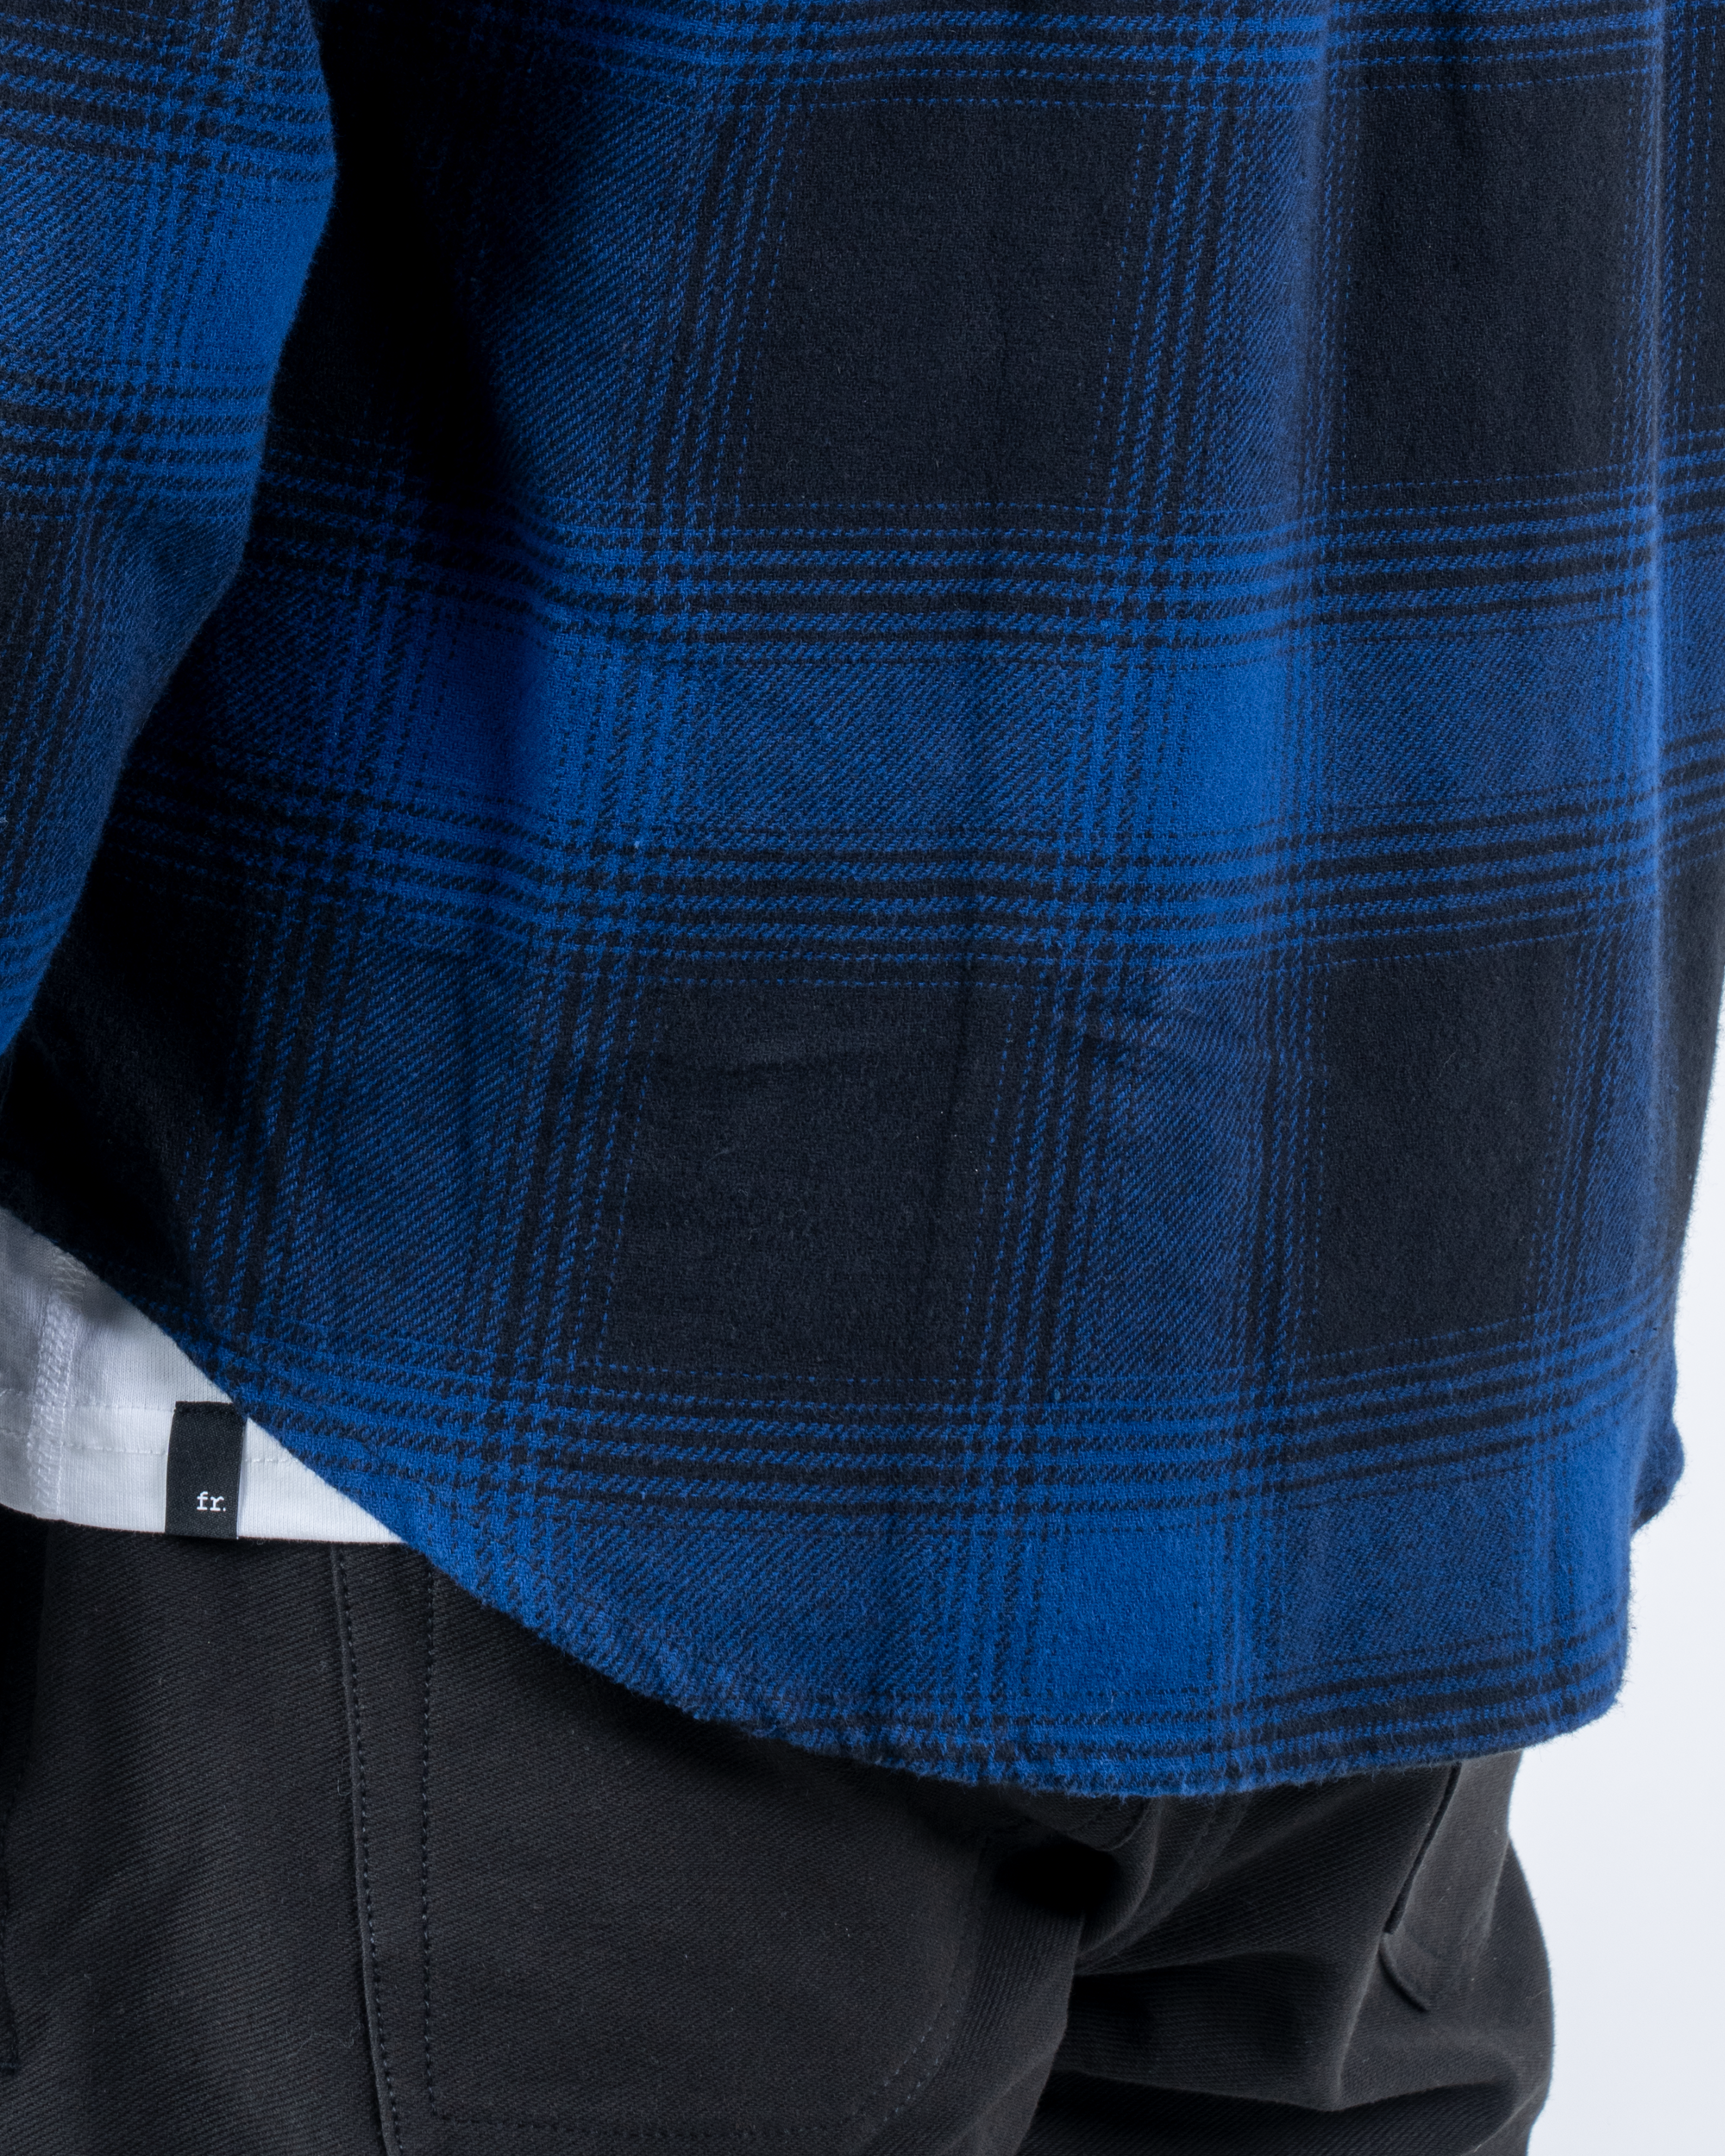 Foreign Rider Co Organic Cotton Blue Flannel Plaid Long Sleeve Button Up Shirt Bottom Back Scoop Detail